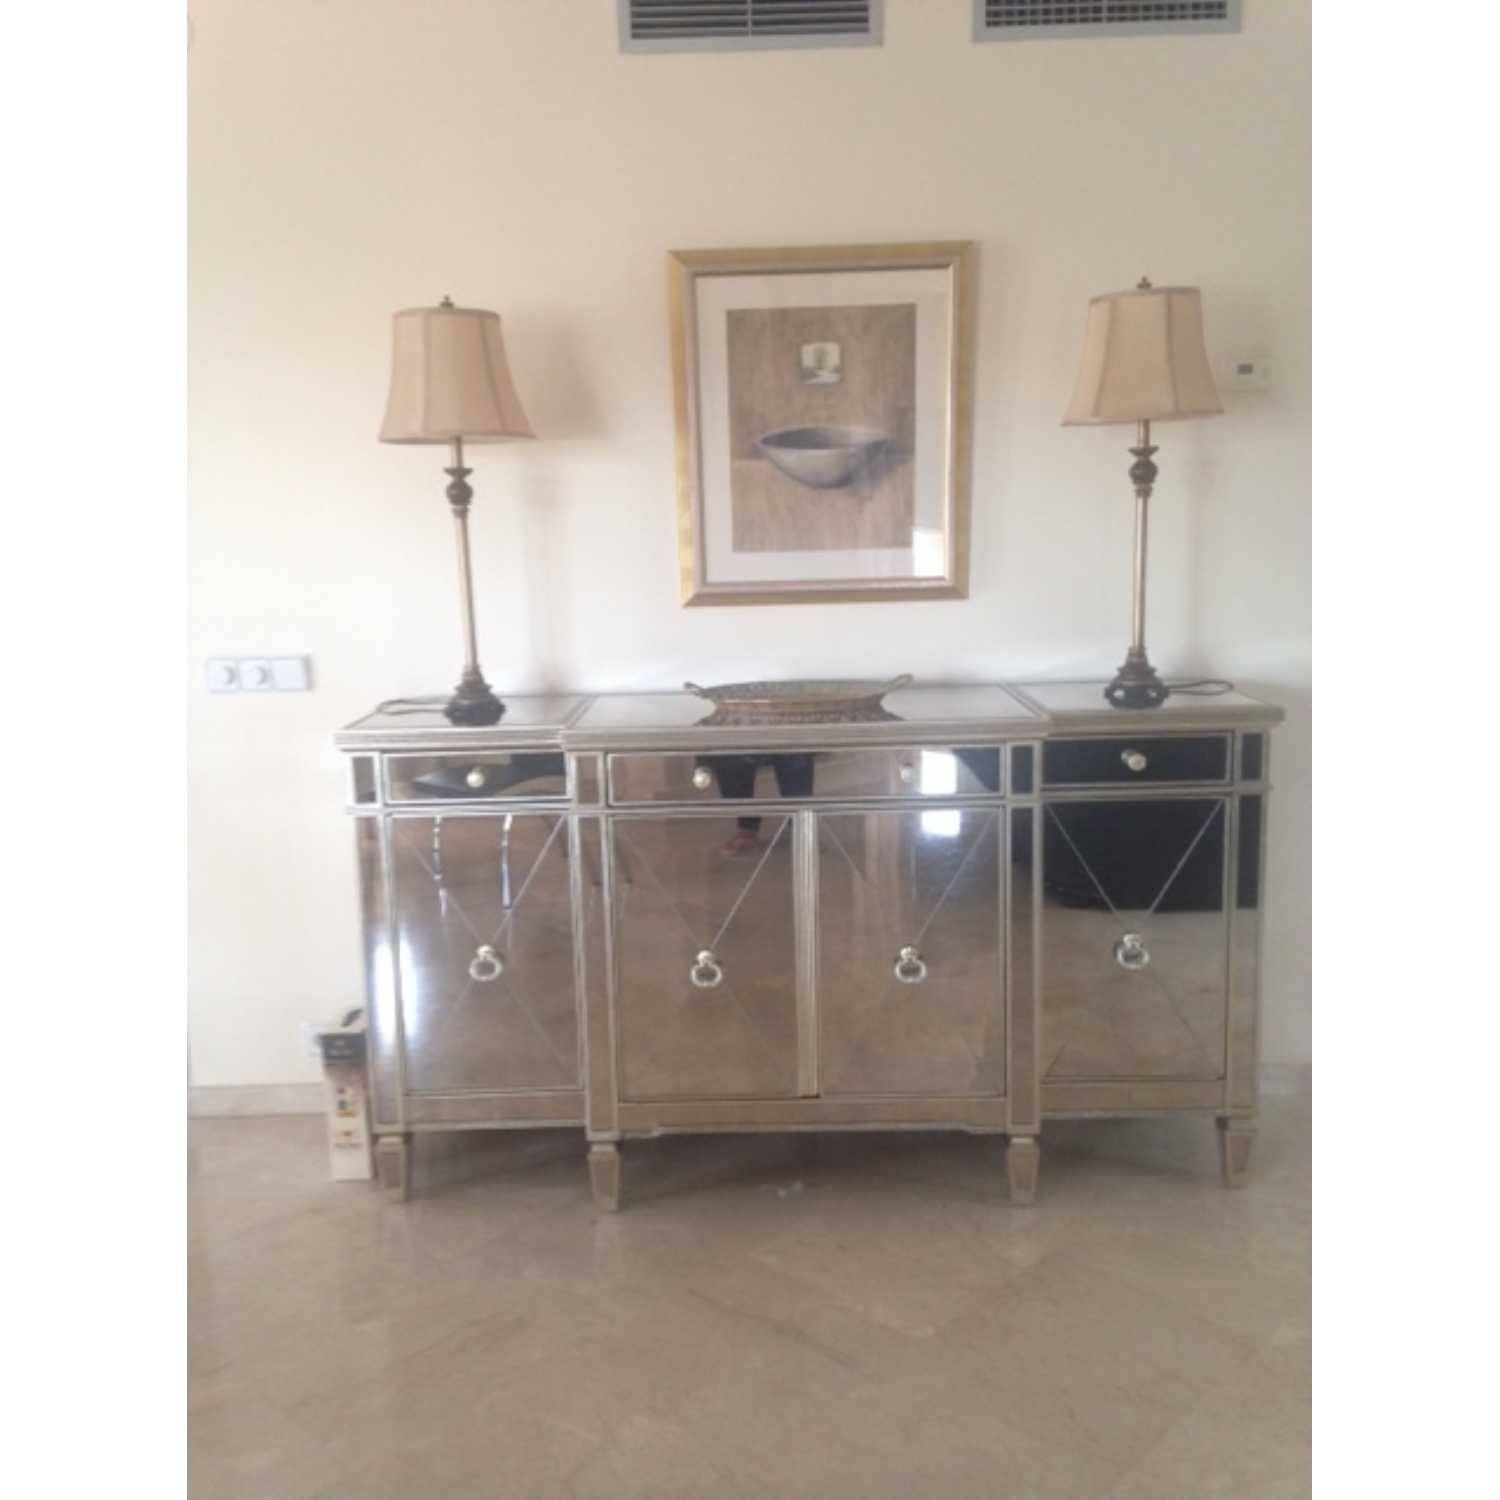 Large Antique Seville Venetian Mirrored Glass Sideboard 4 Door Intended For Glass Sideboard (Photo 2 of 20)